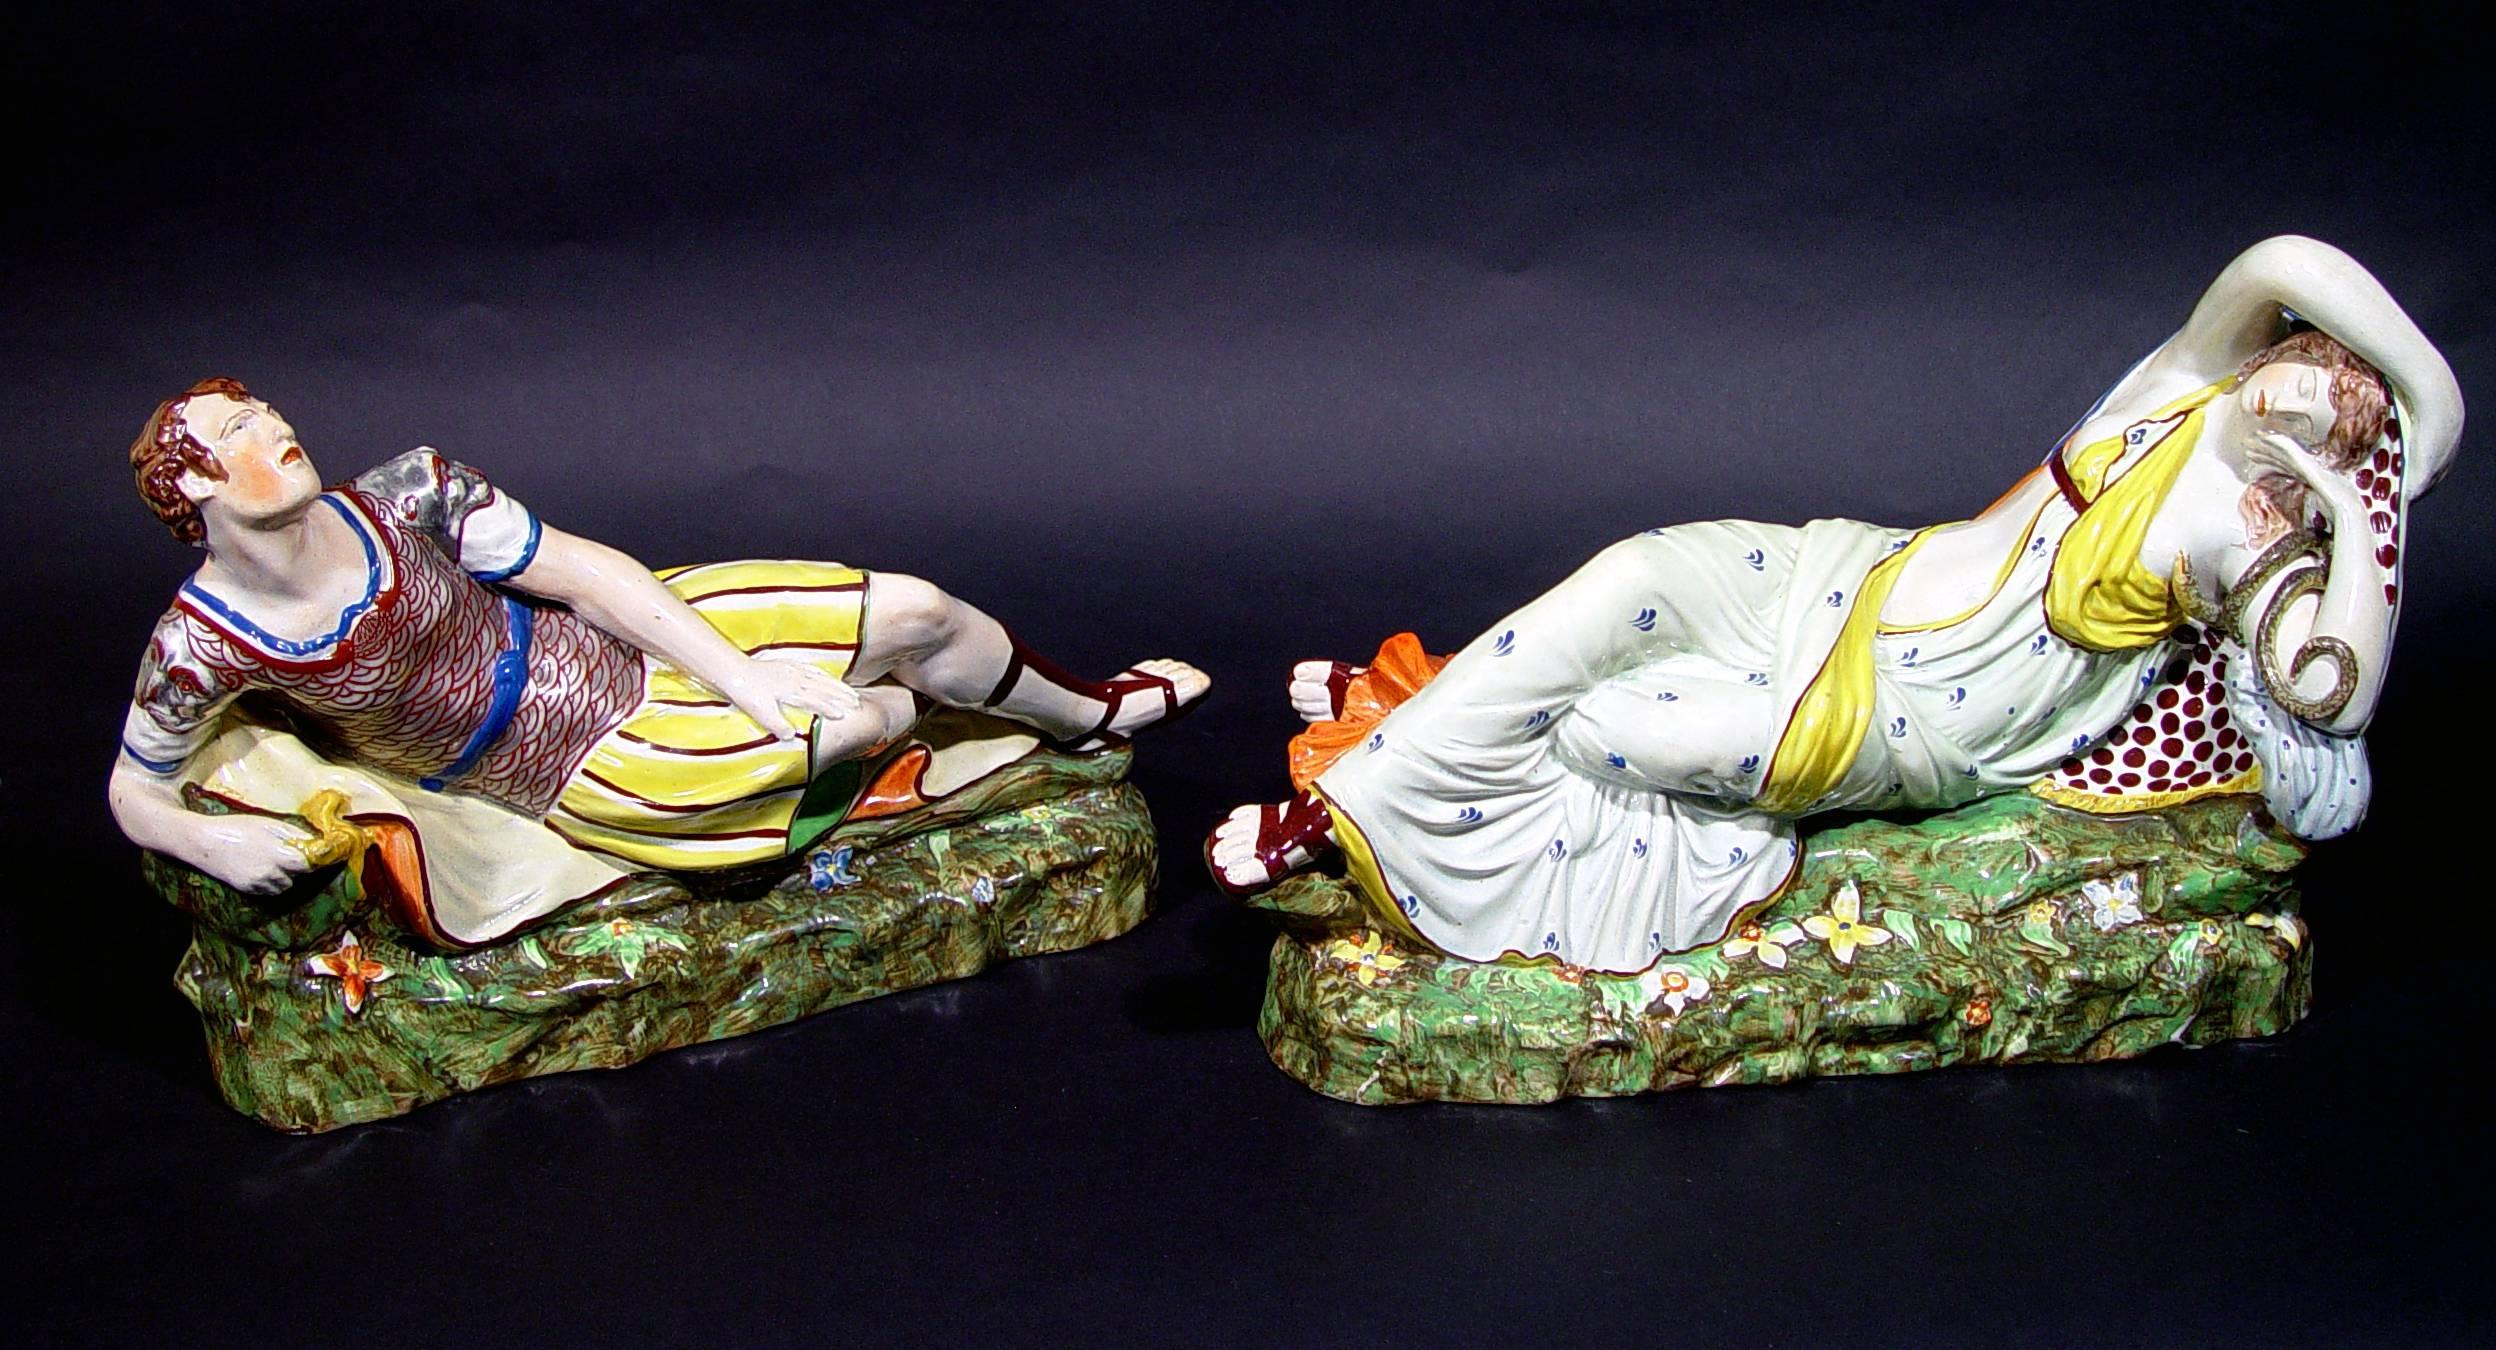 The pearlware figures are either by Enoch Wood or Enoch Wood and Caldwell. Each reclining on rocky ground angled to resemble a recamier, he wearing a cuirasse in platinum, she a yellow-lined gown painted with scattered purple flowers, a bright green